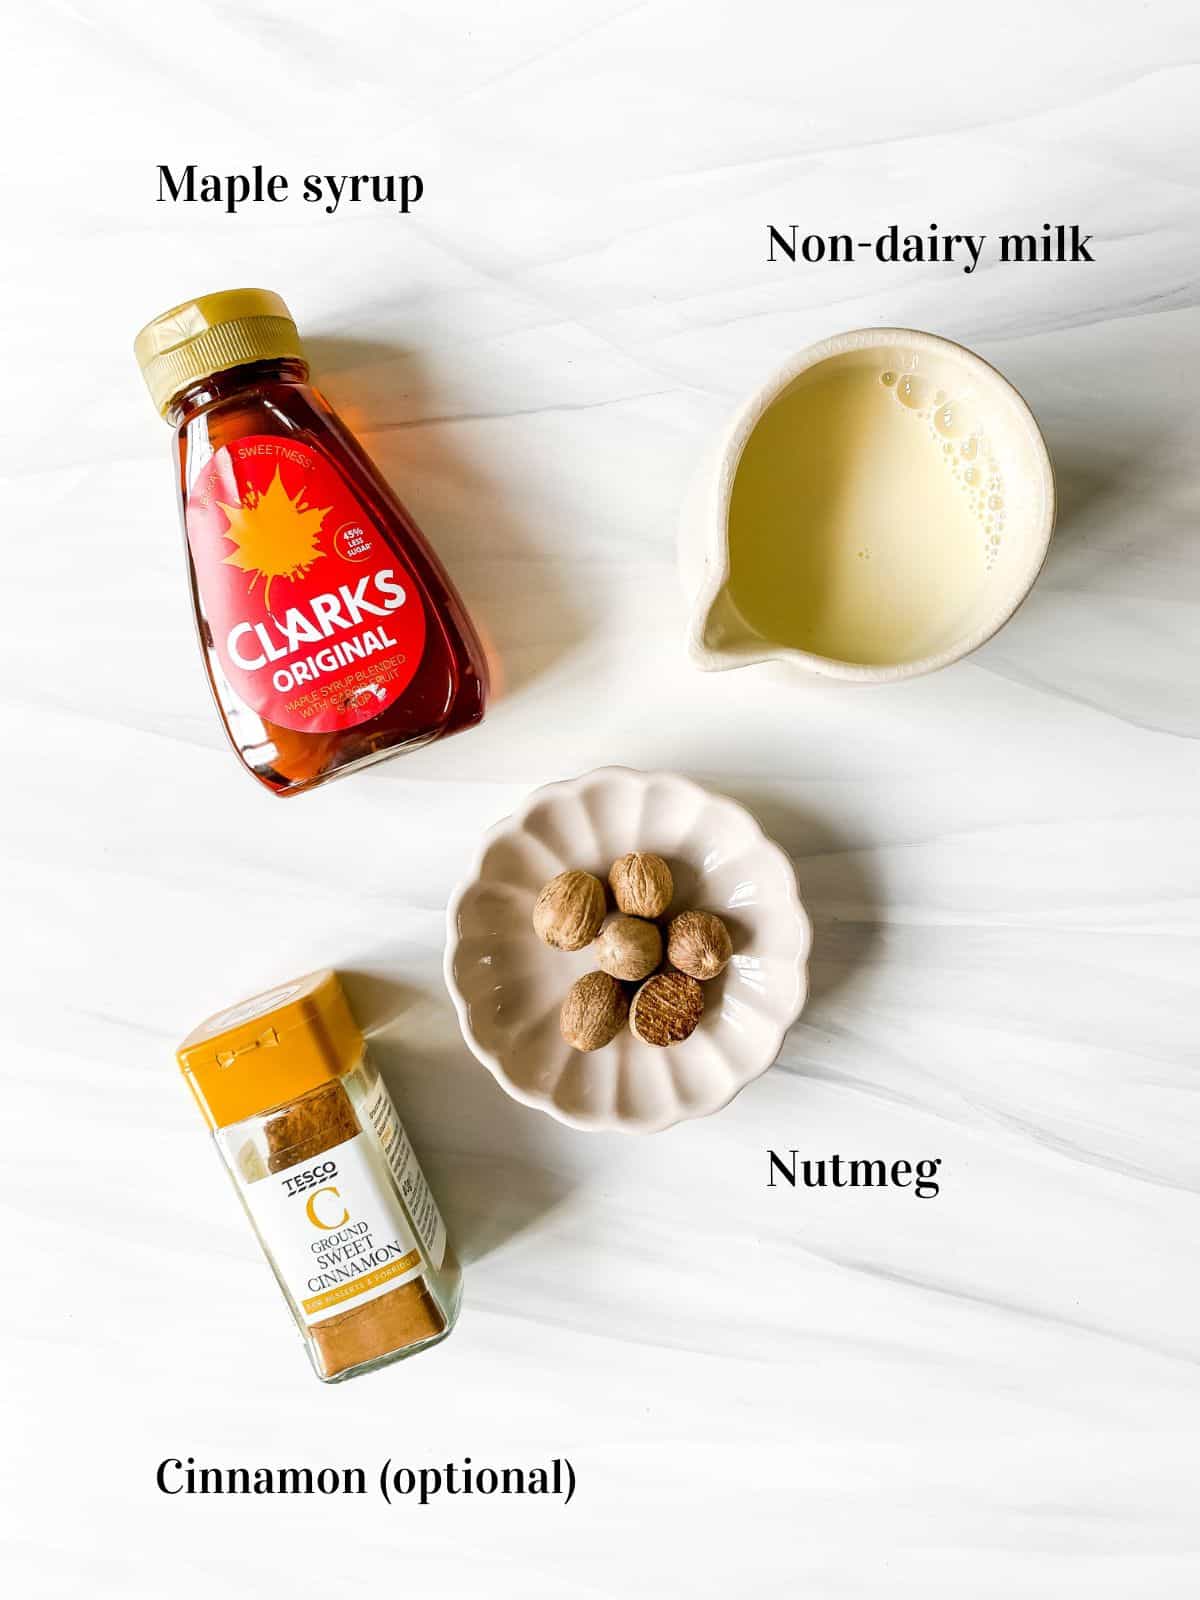 individually labelled ingredients to make nutmeg milk including maple syrup, nutmegs and cinnamon.